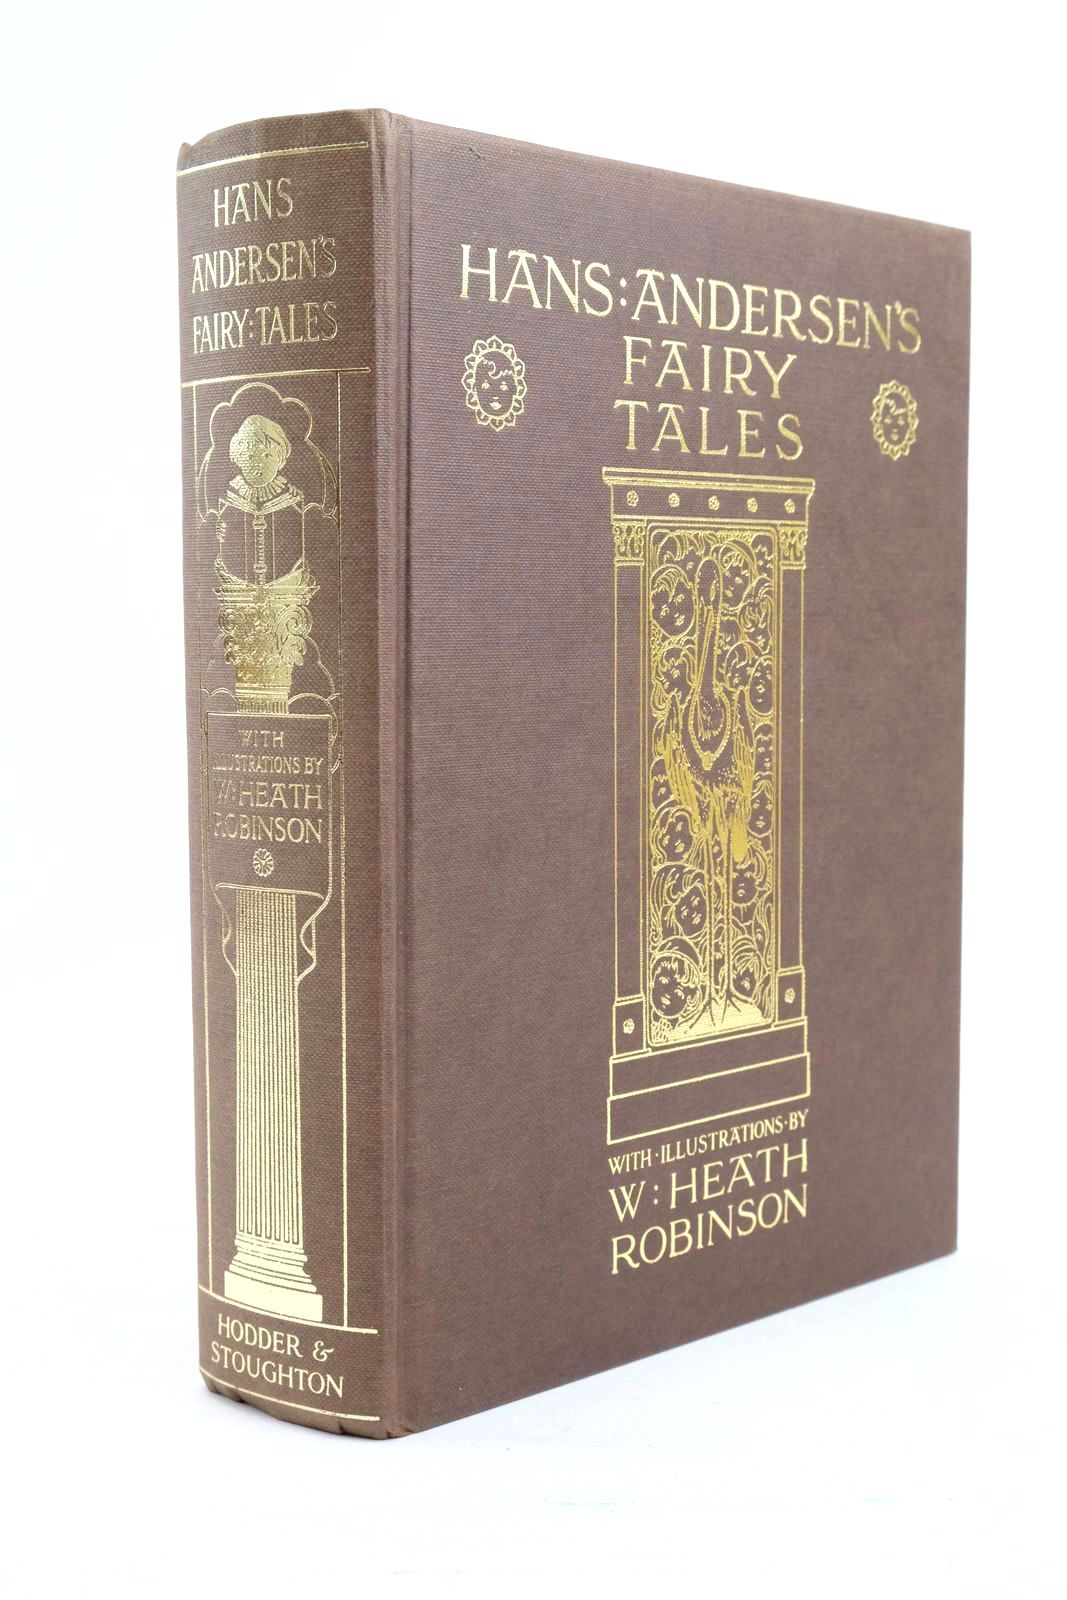 Photo of HANS ANDERSEN'S FAIRY TALES written by Andersen, Hans Christian illustrated by Robinson, W. Heath published by Hodder &amp; Stoughton (STOCK CODE: 1320796)  for sale by Stella & Rose's Books